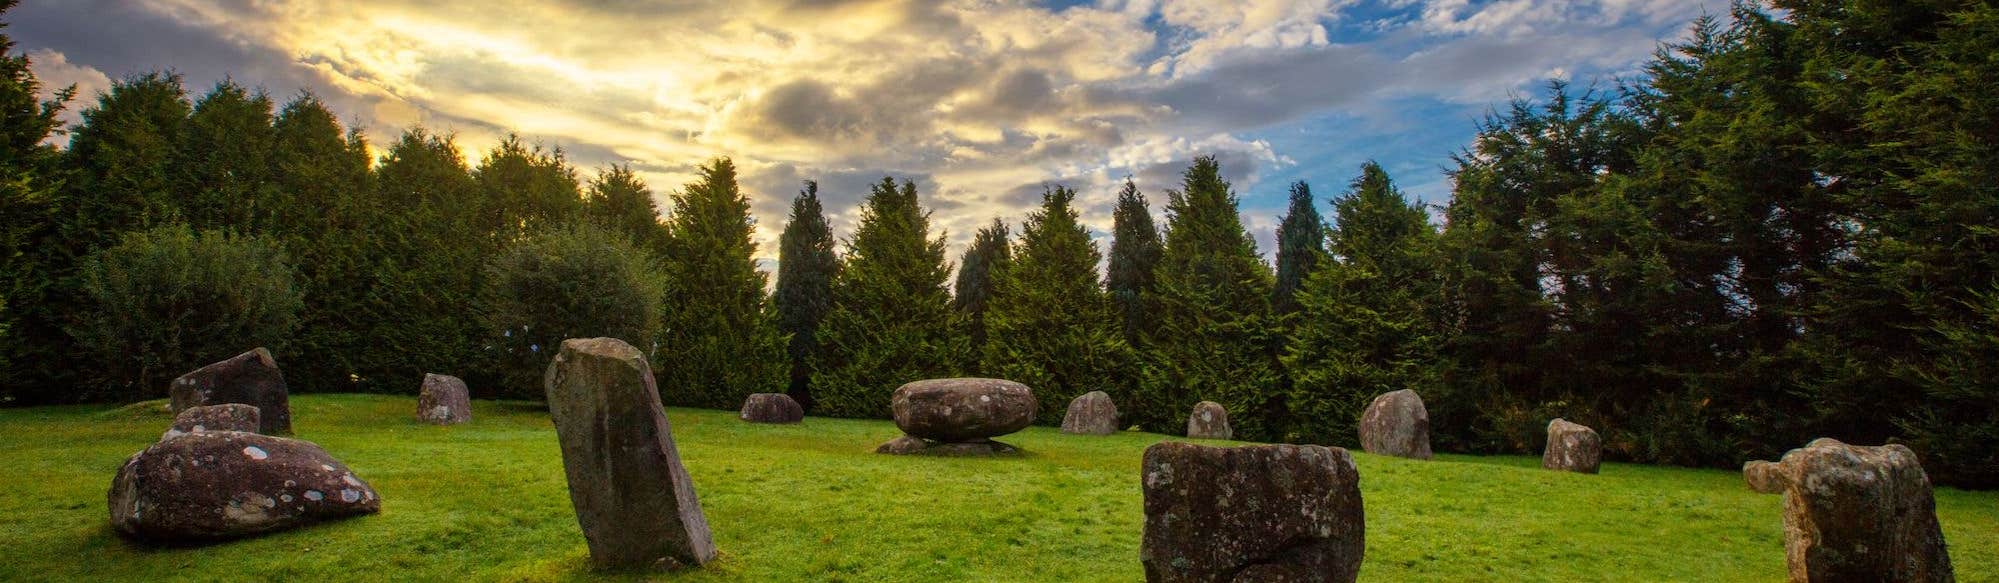 Image of a stone circle in Kenmare in County Kerry